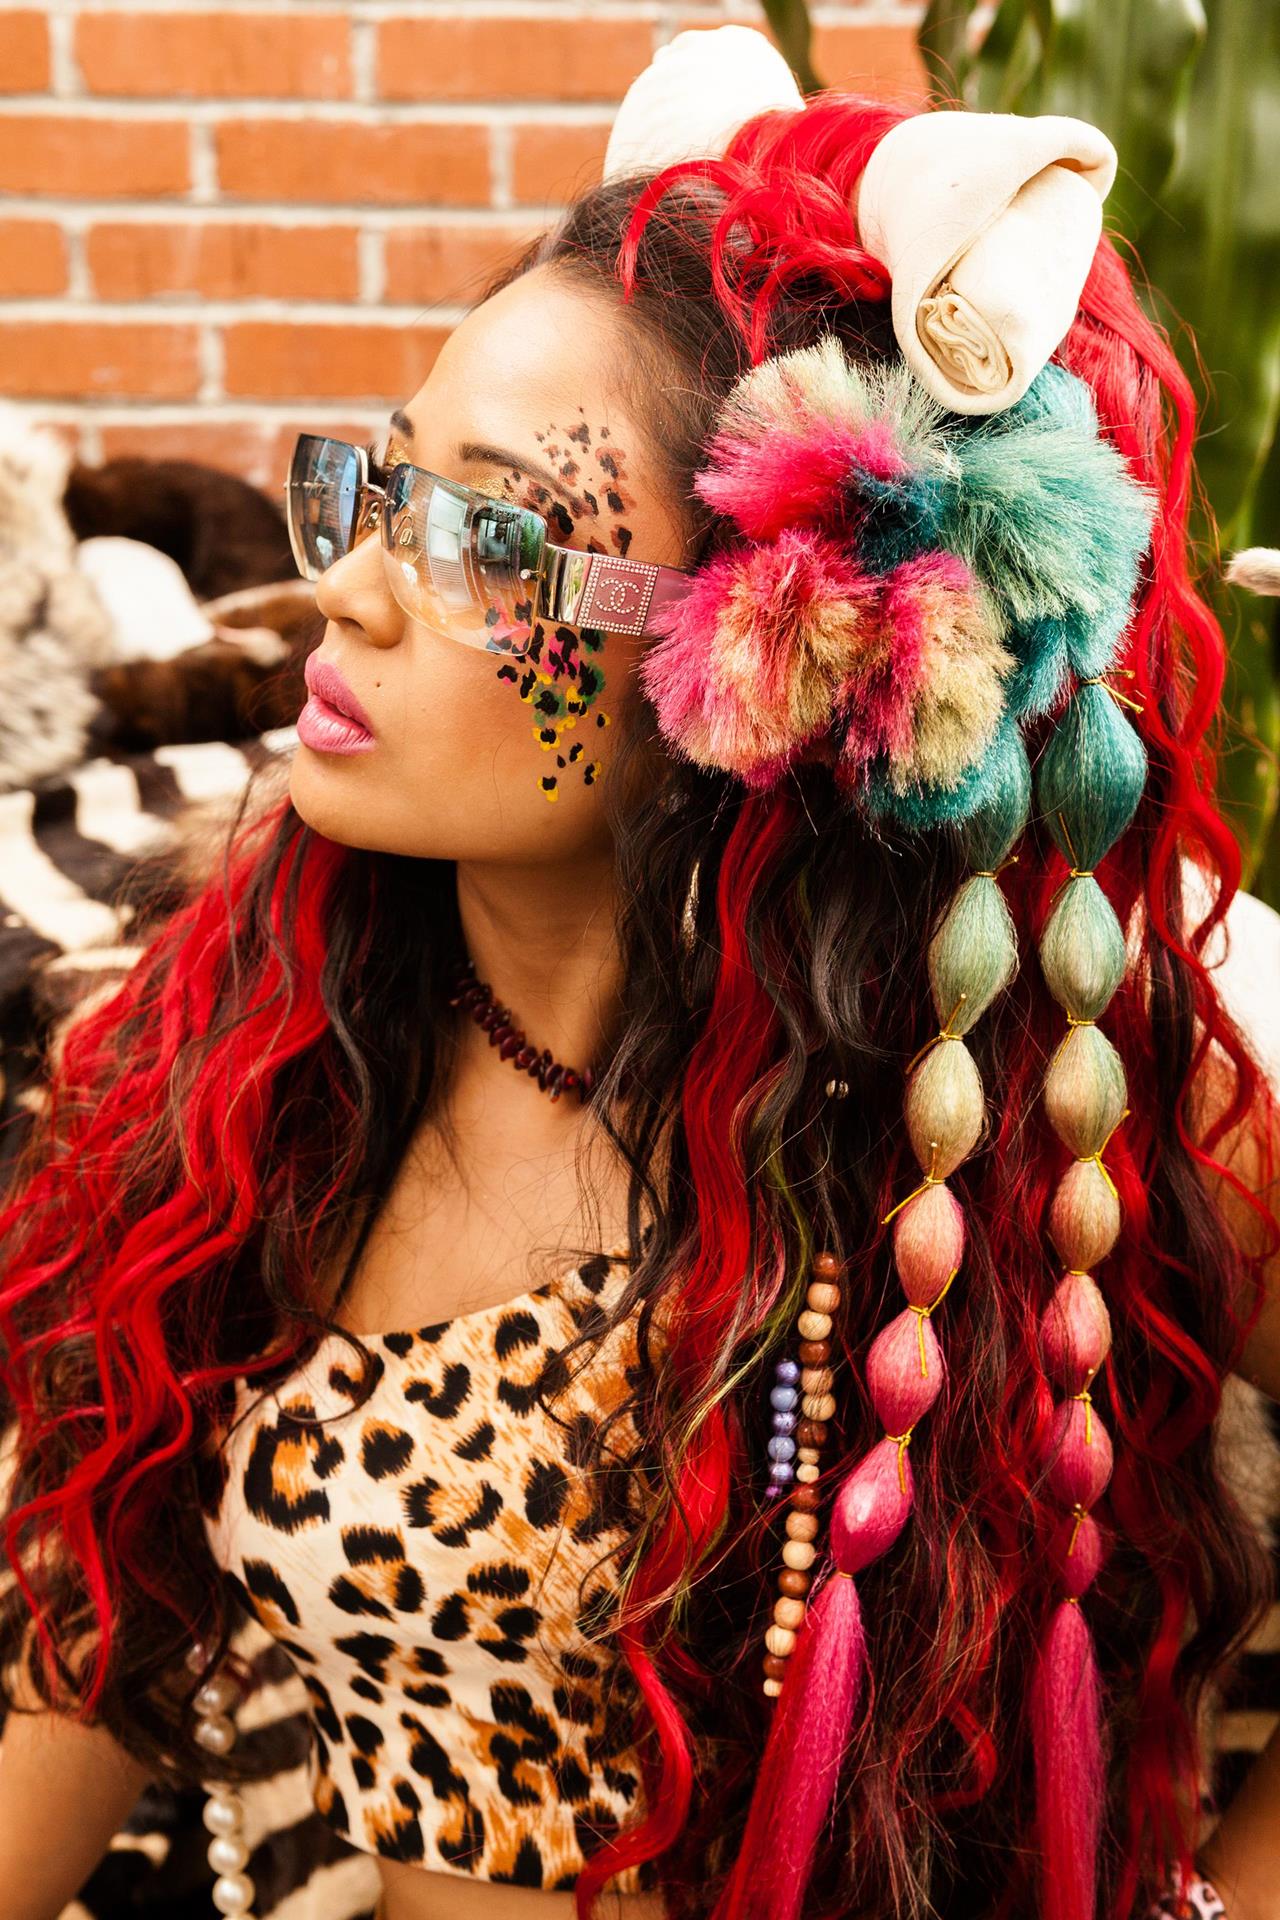 Hair Extensions, Color, Costume and Styling combine into The belle of the BedRock Ball, Pebblz.